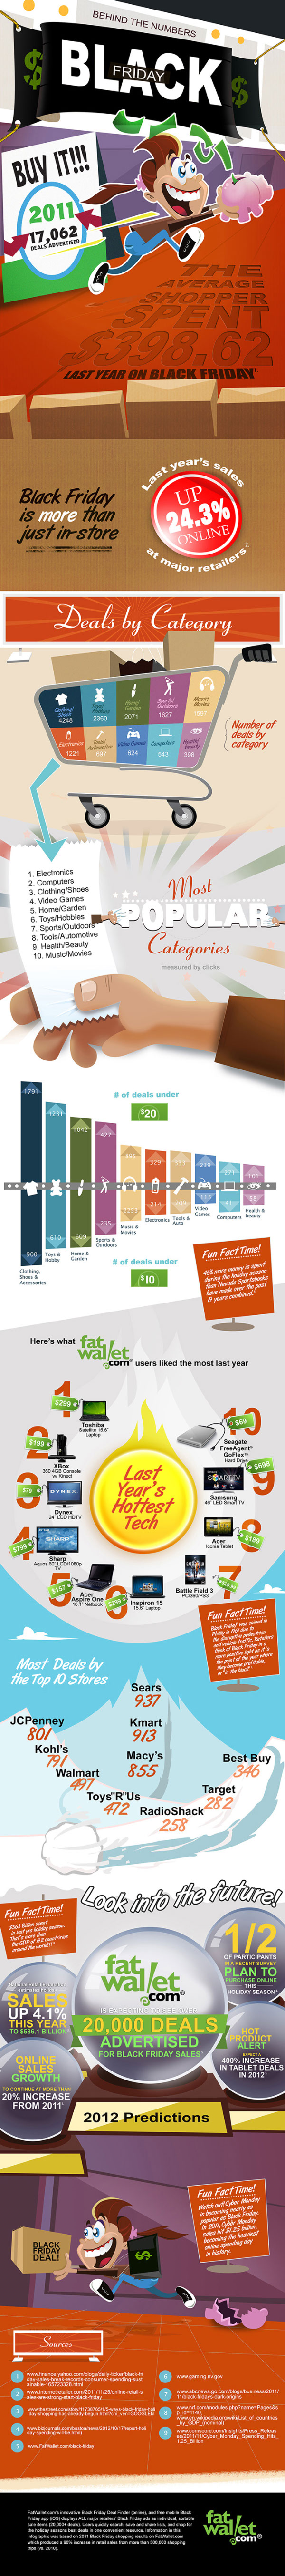 Black Friday Predictions 2012-Infographic